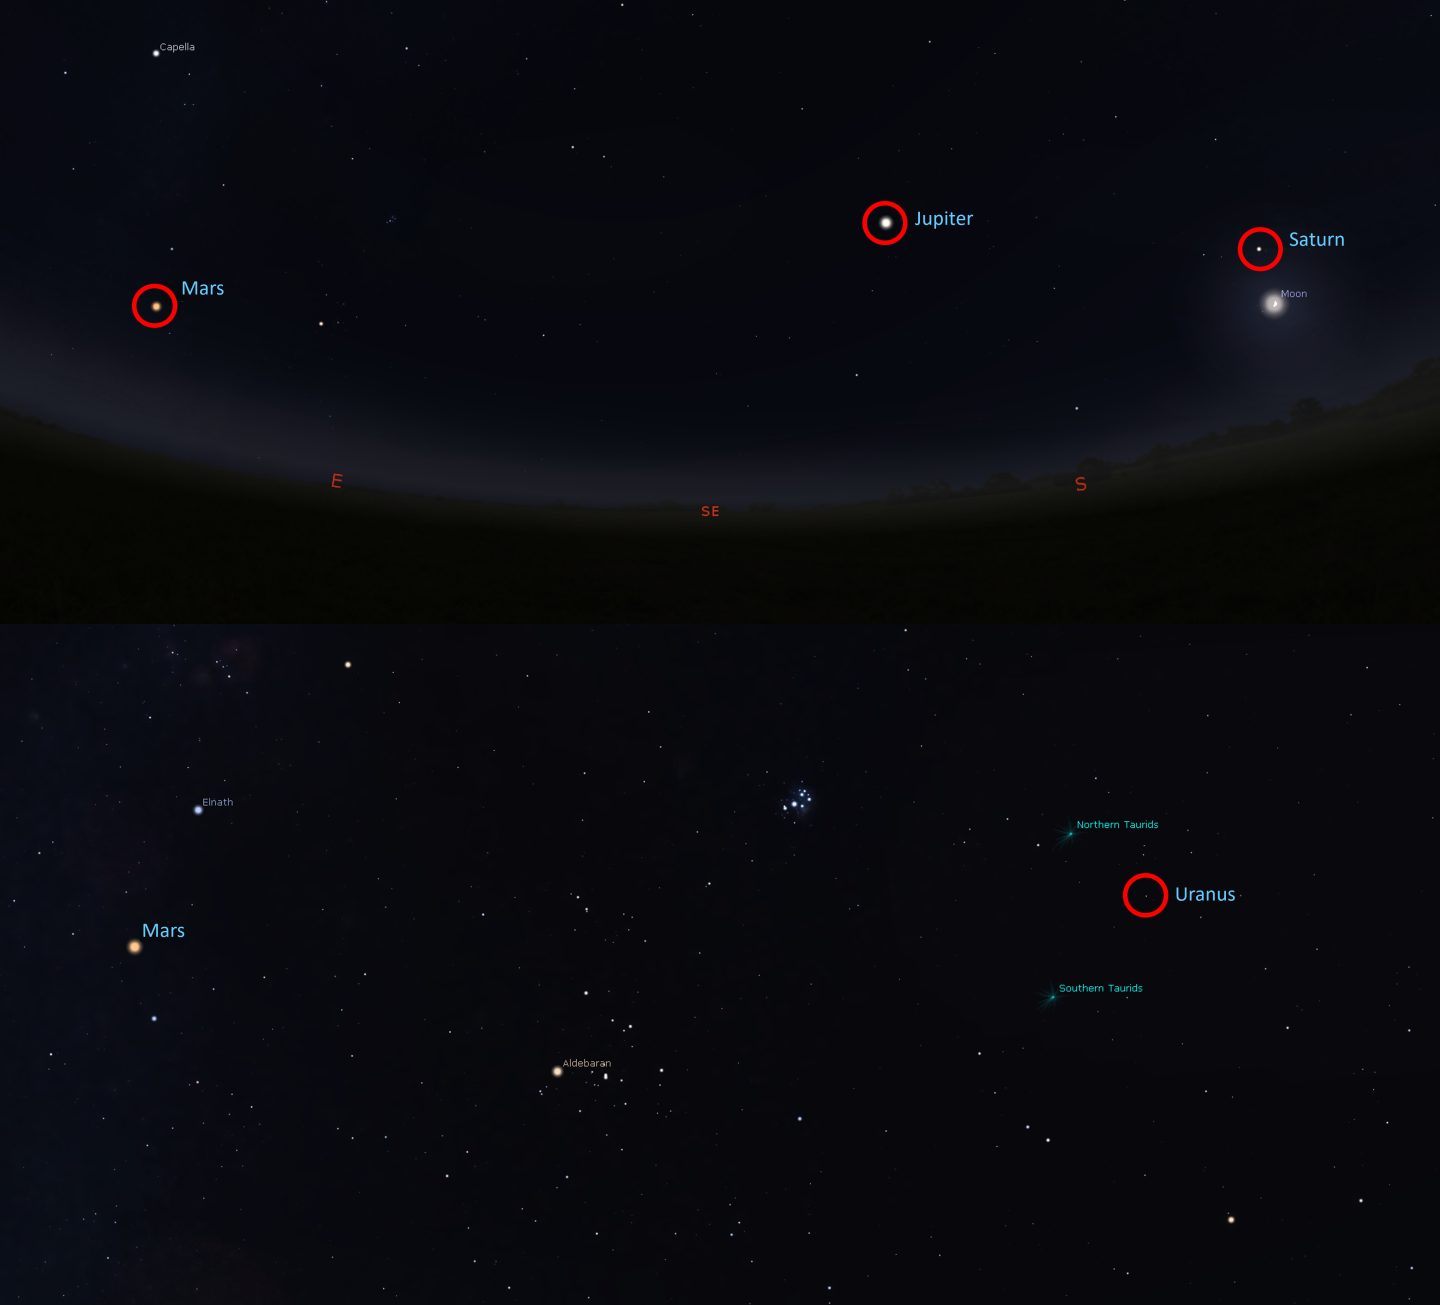 Mars, Jupiter and Saturn in the night sky at the top. Mars and Uranus in the night sky at the bottom.